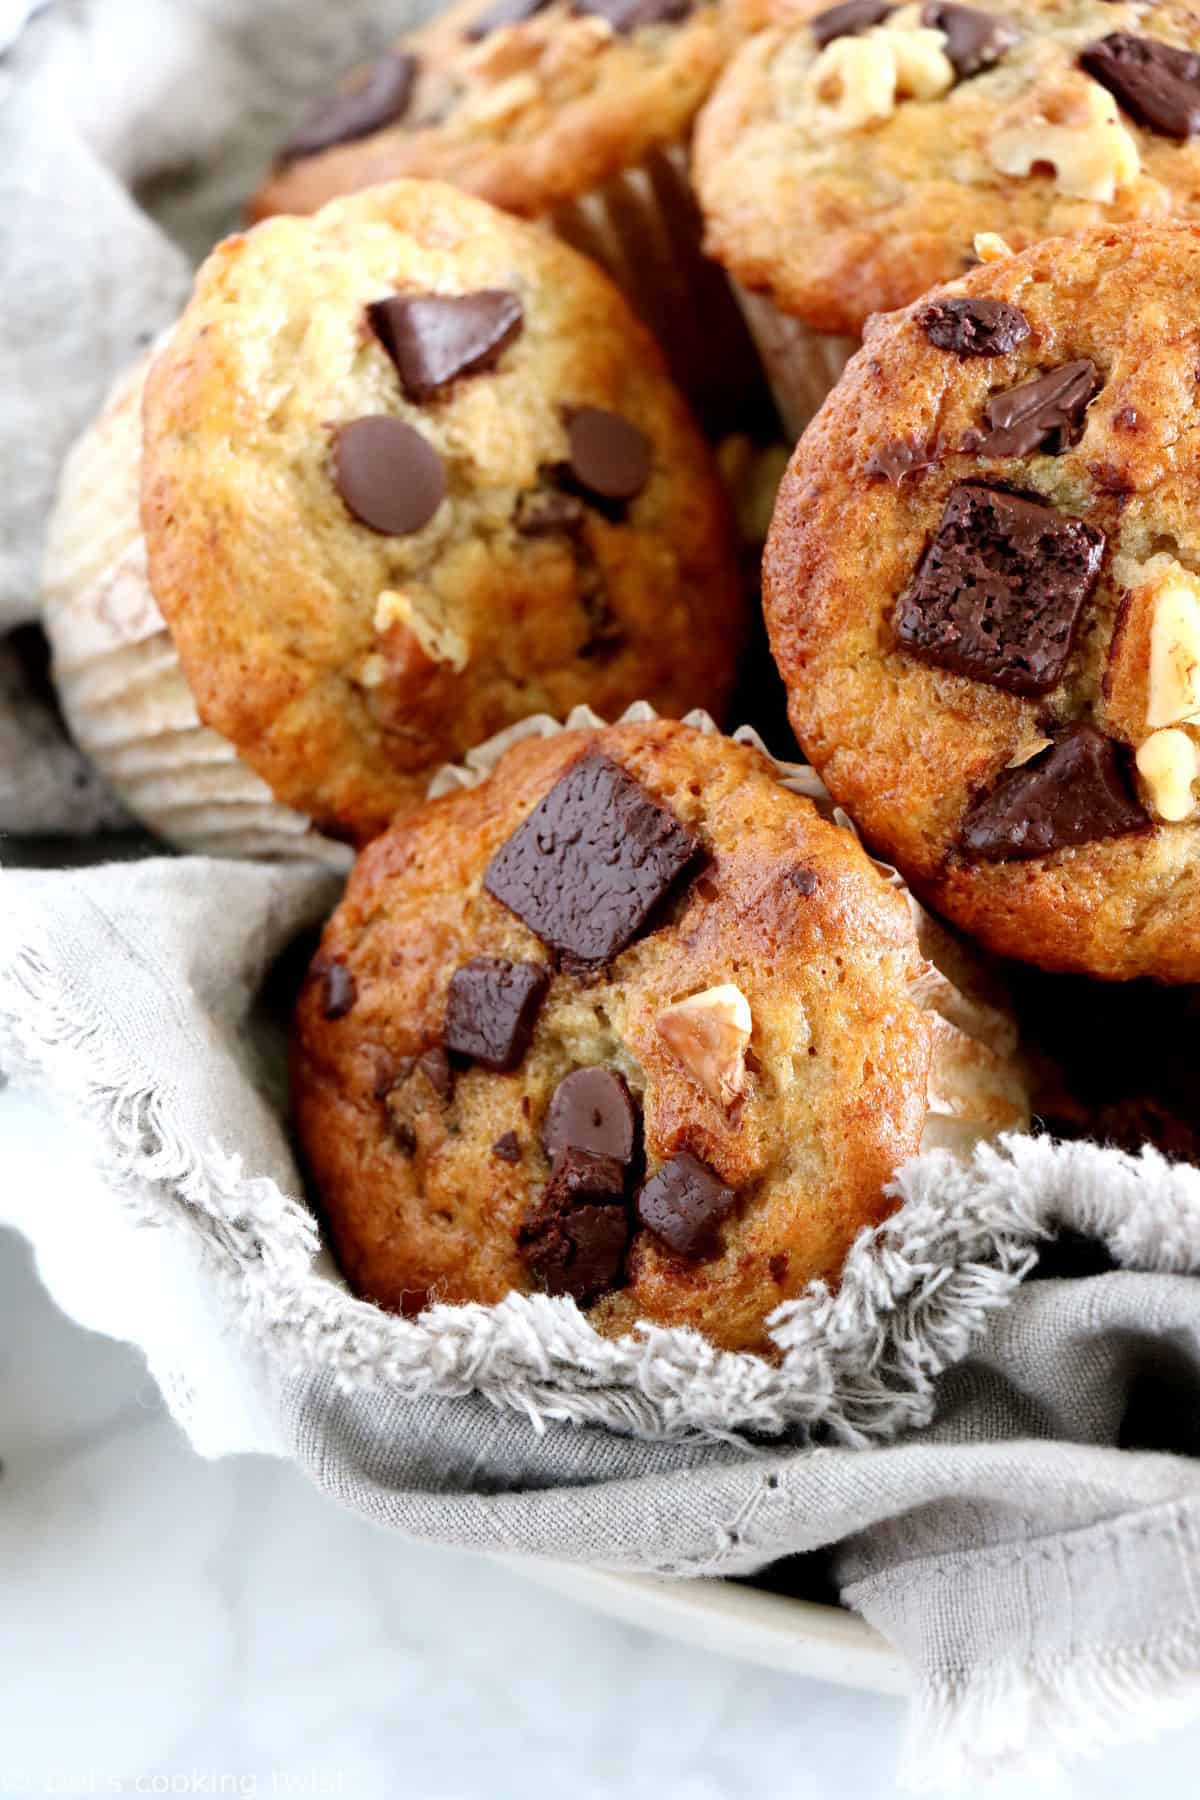 Chocolate Chip Muffins - Del's cooking twist